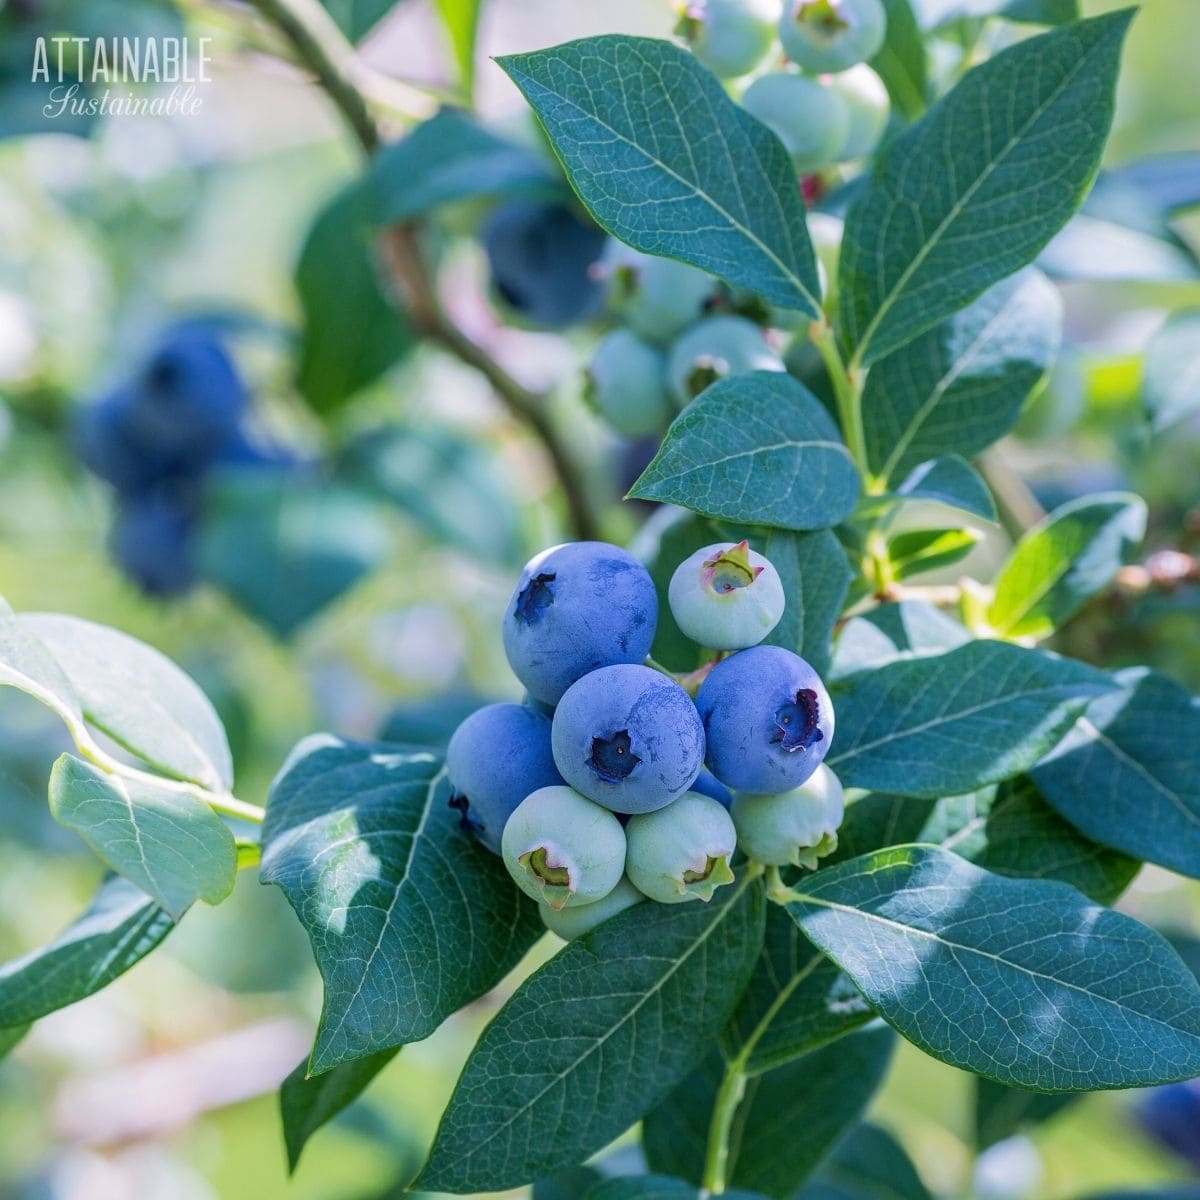 blueberries growing on a plant.